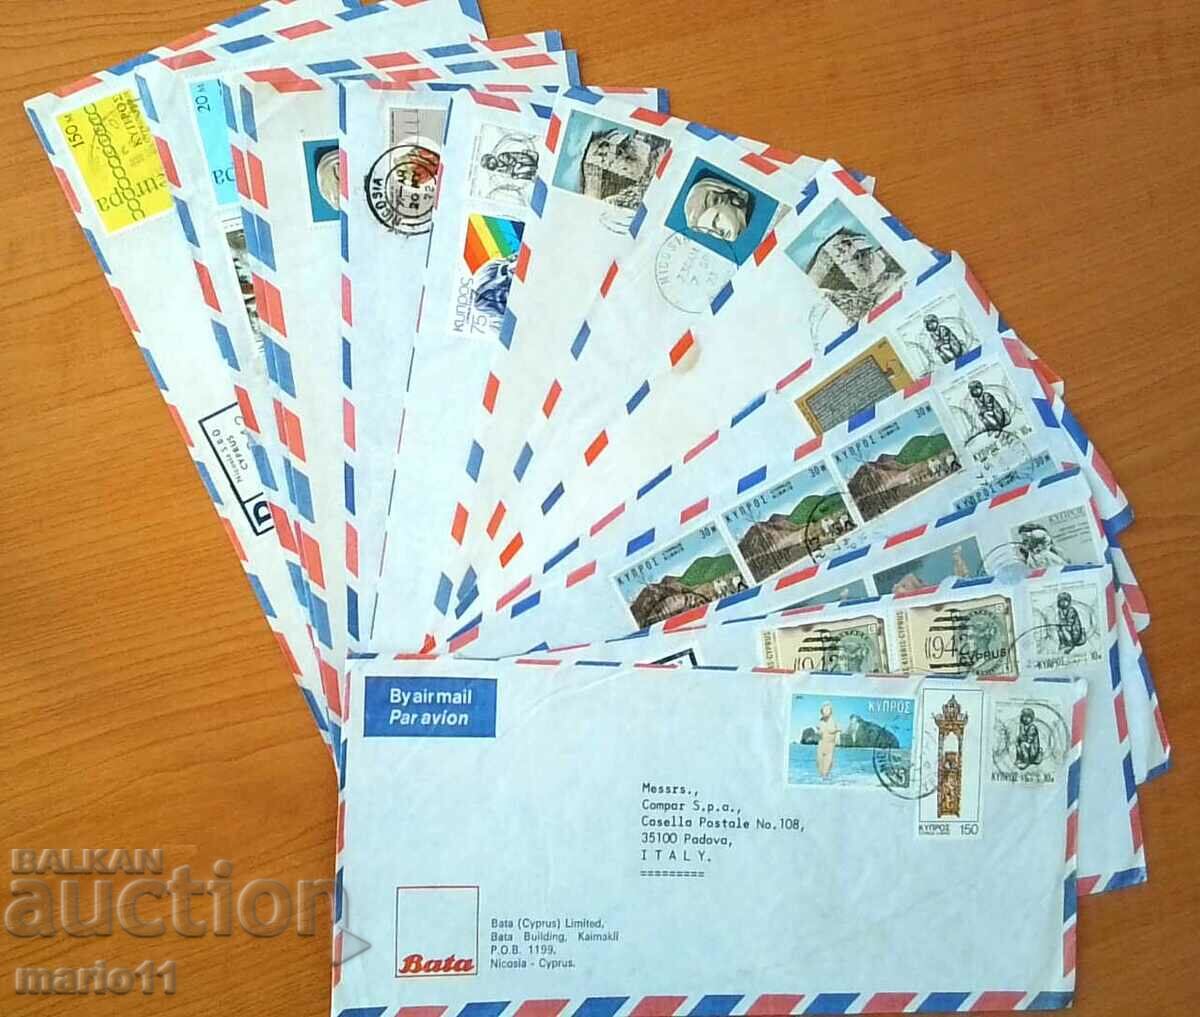 Traveled envelopes with stamps - Cyprus